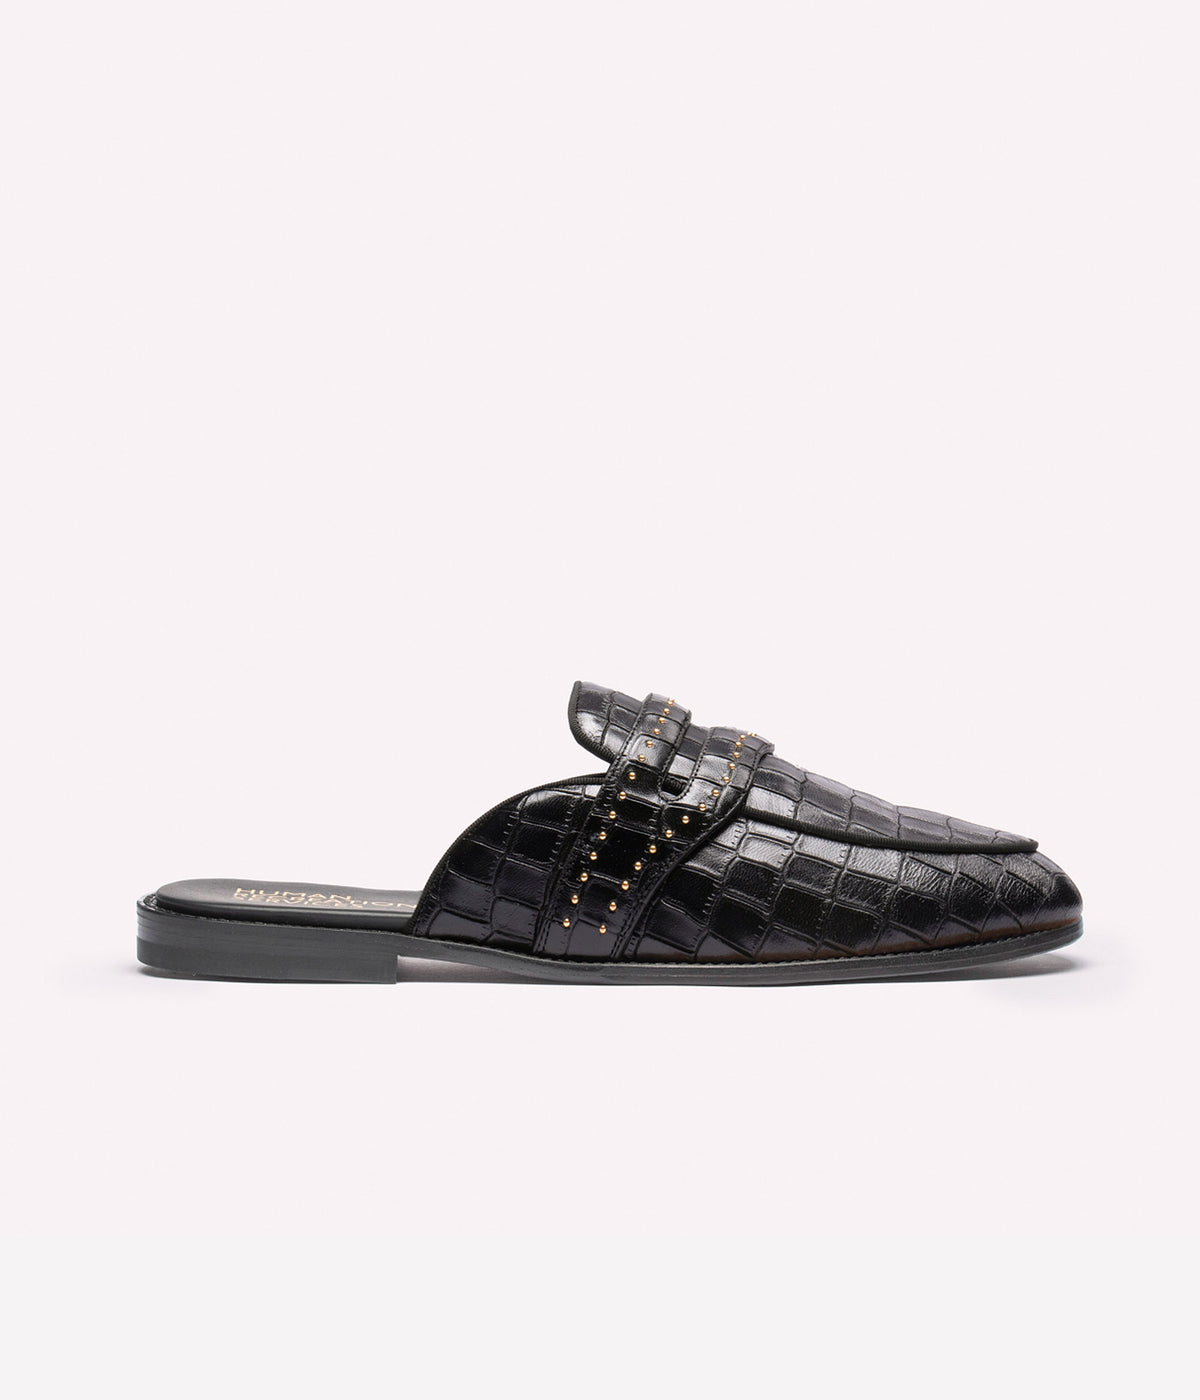 HUMAN RECREATIONAL SERVICES PALAZZO SLIPPER IN STUD BLACK MADE WITH ITALIAN CALF SKIN